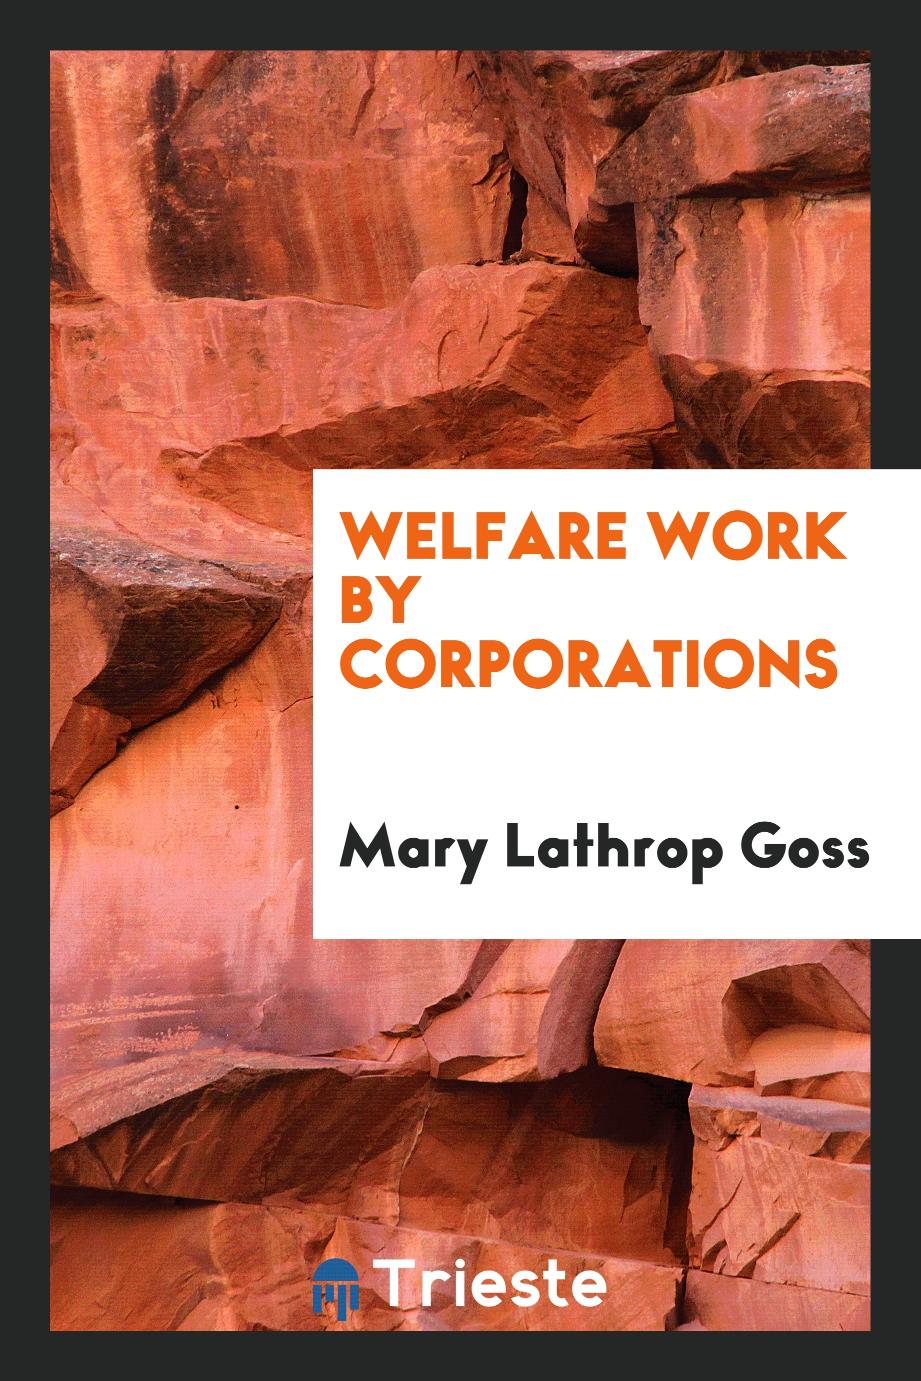 Welfare work by corporations